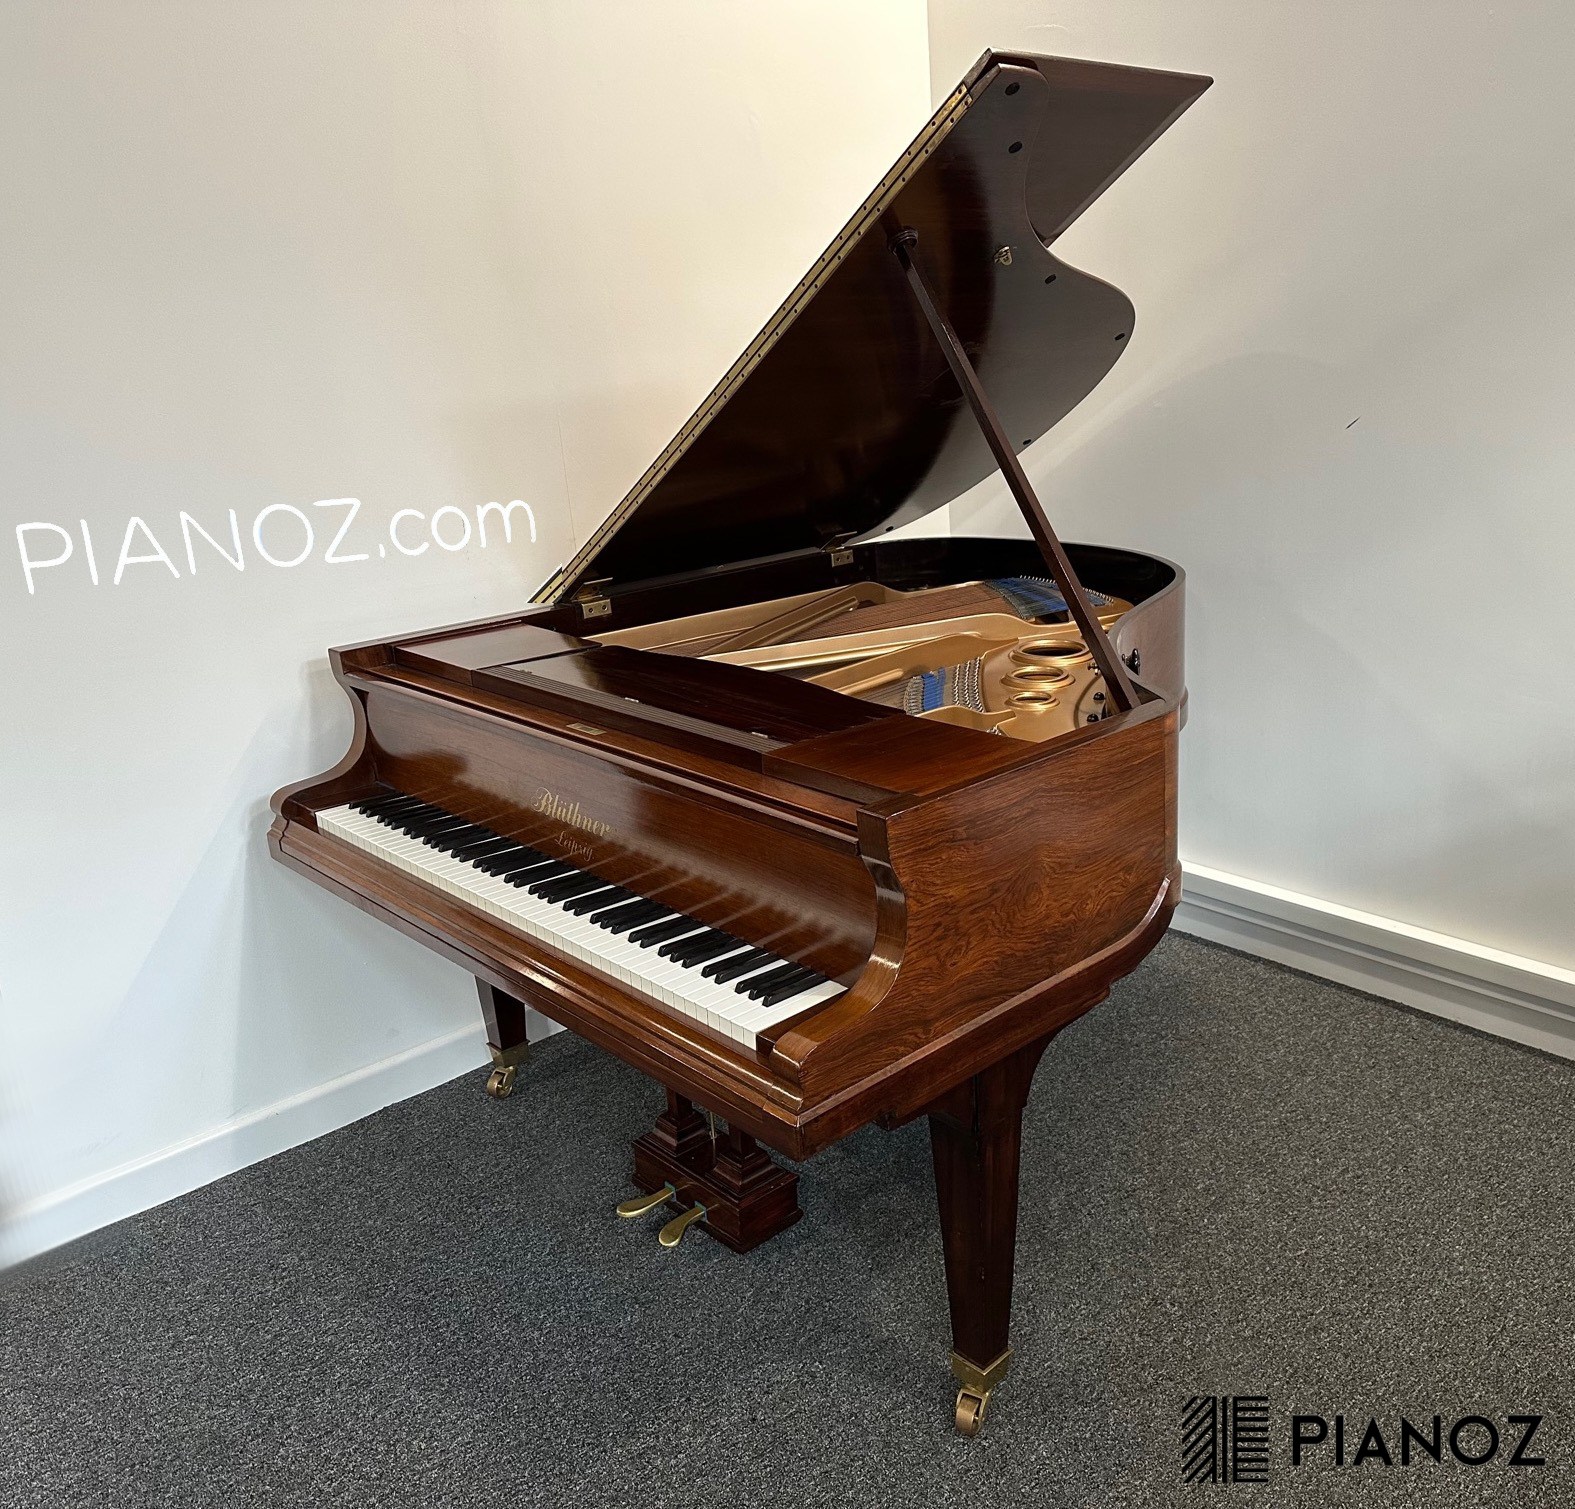 Bluthner Style 5 Baby Grand Piano piano for sale in UK